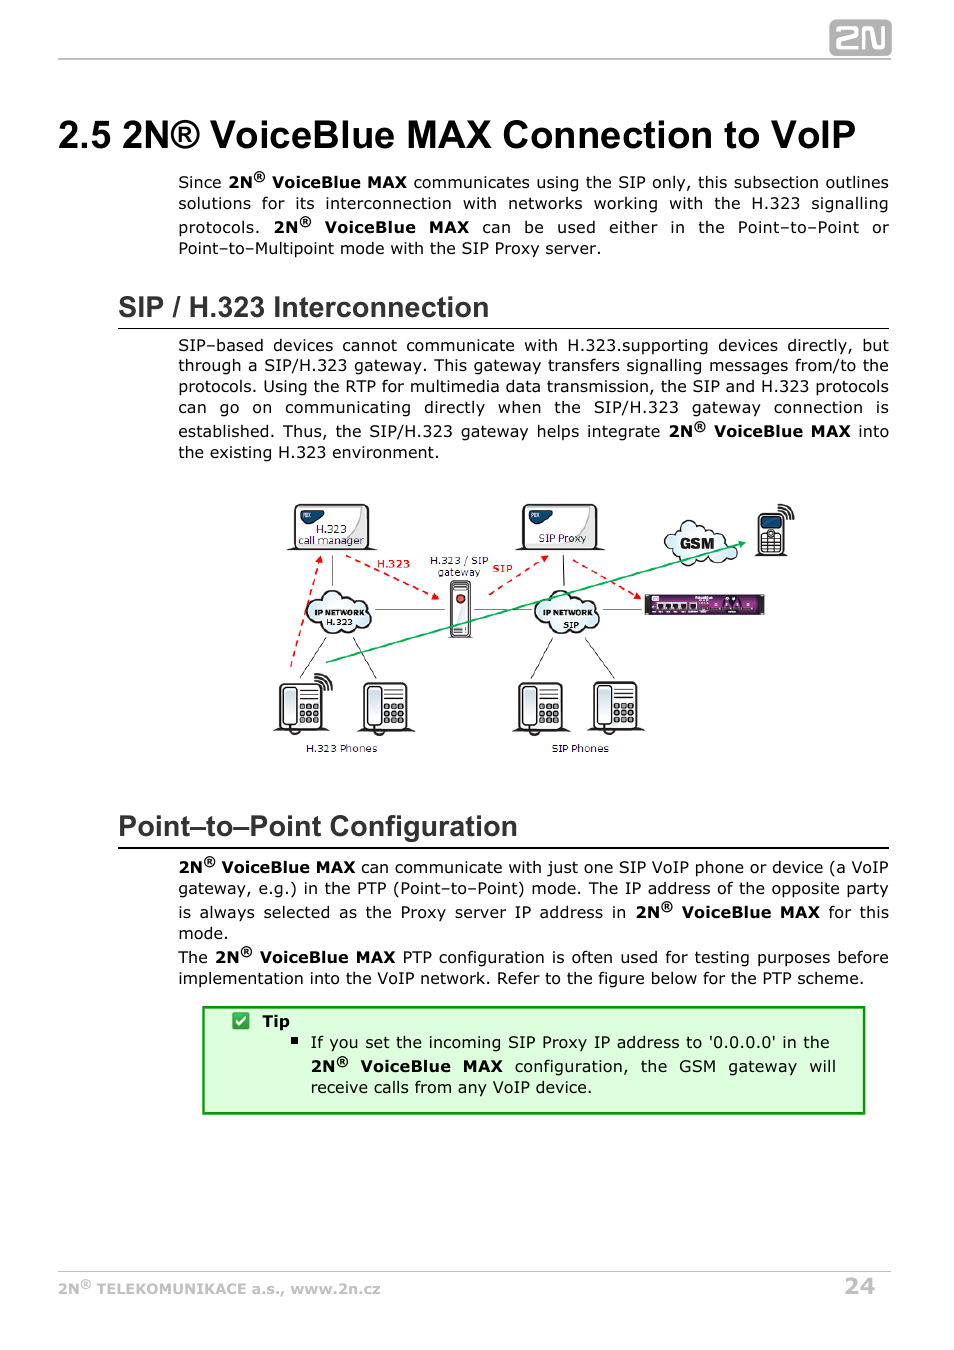 5 2n® voiceblue max connection to voip, Sip / h.323 interconnection, Point–to–point configuration | 2N VoiceBlue MAX v1.1 User Manual | Page 24 / 104